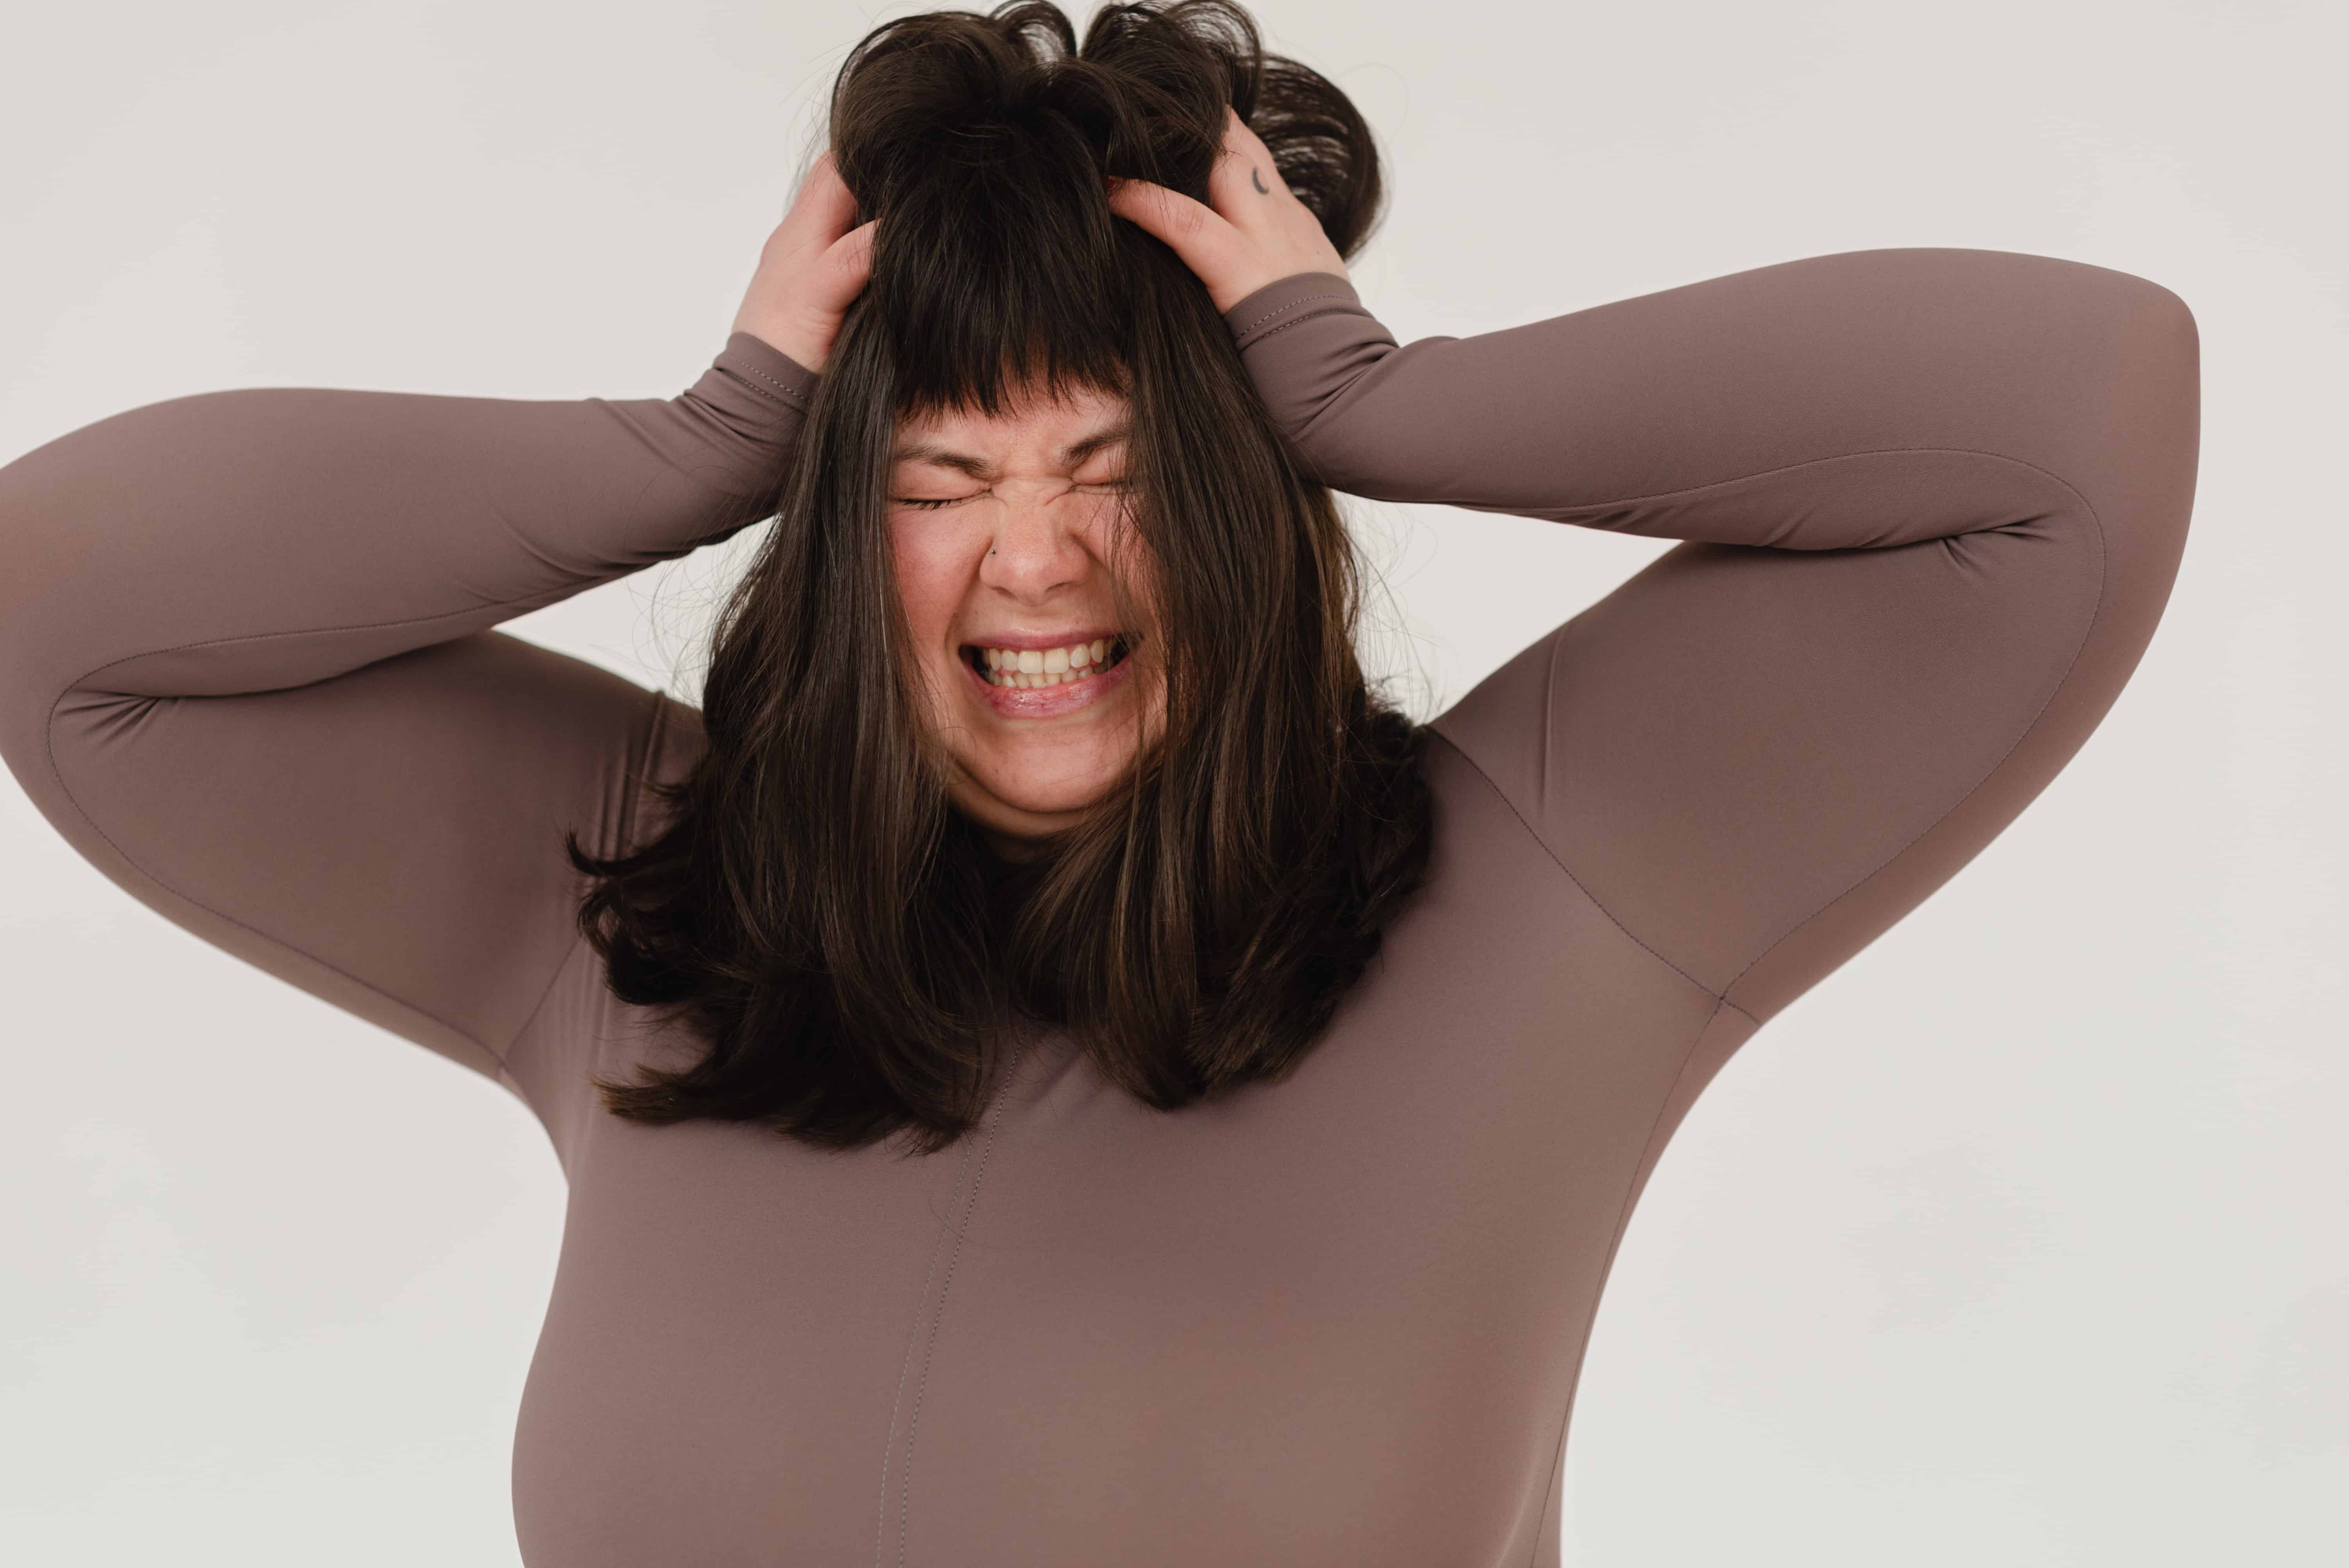 Stressed out woman grabs at her hair in frustration, stock photo.